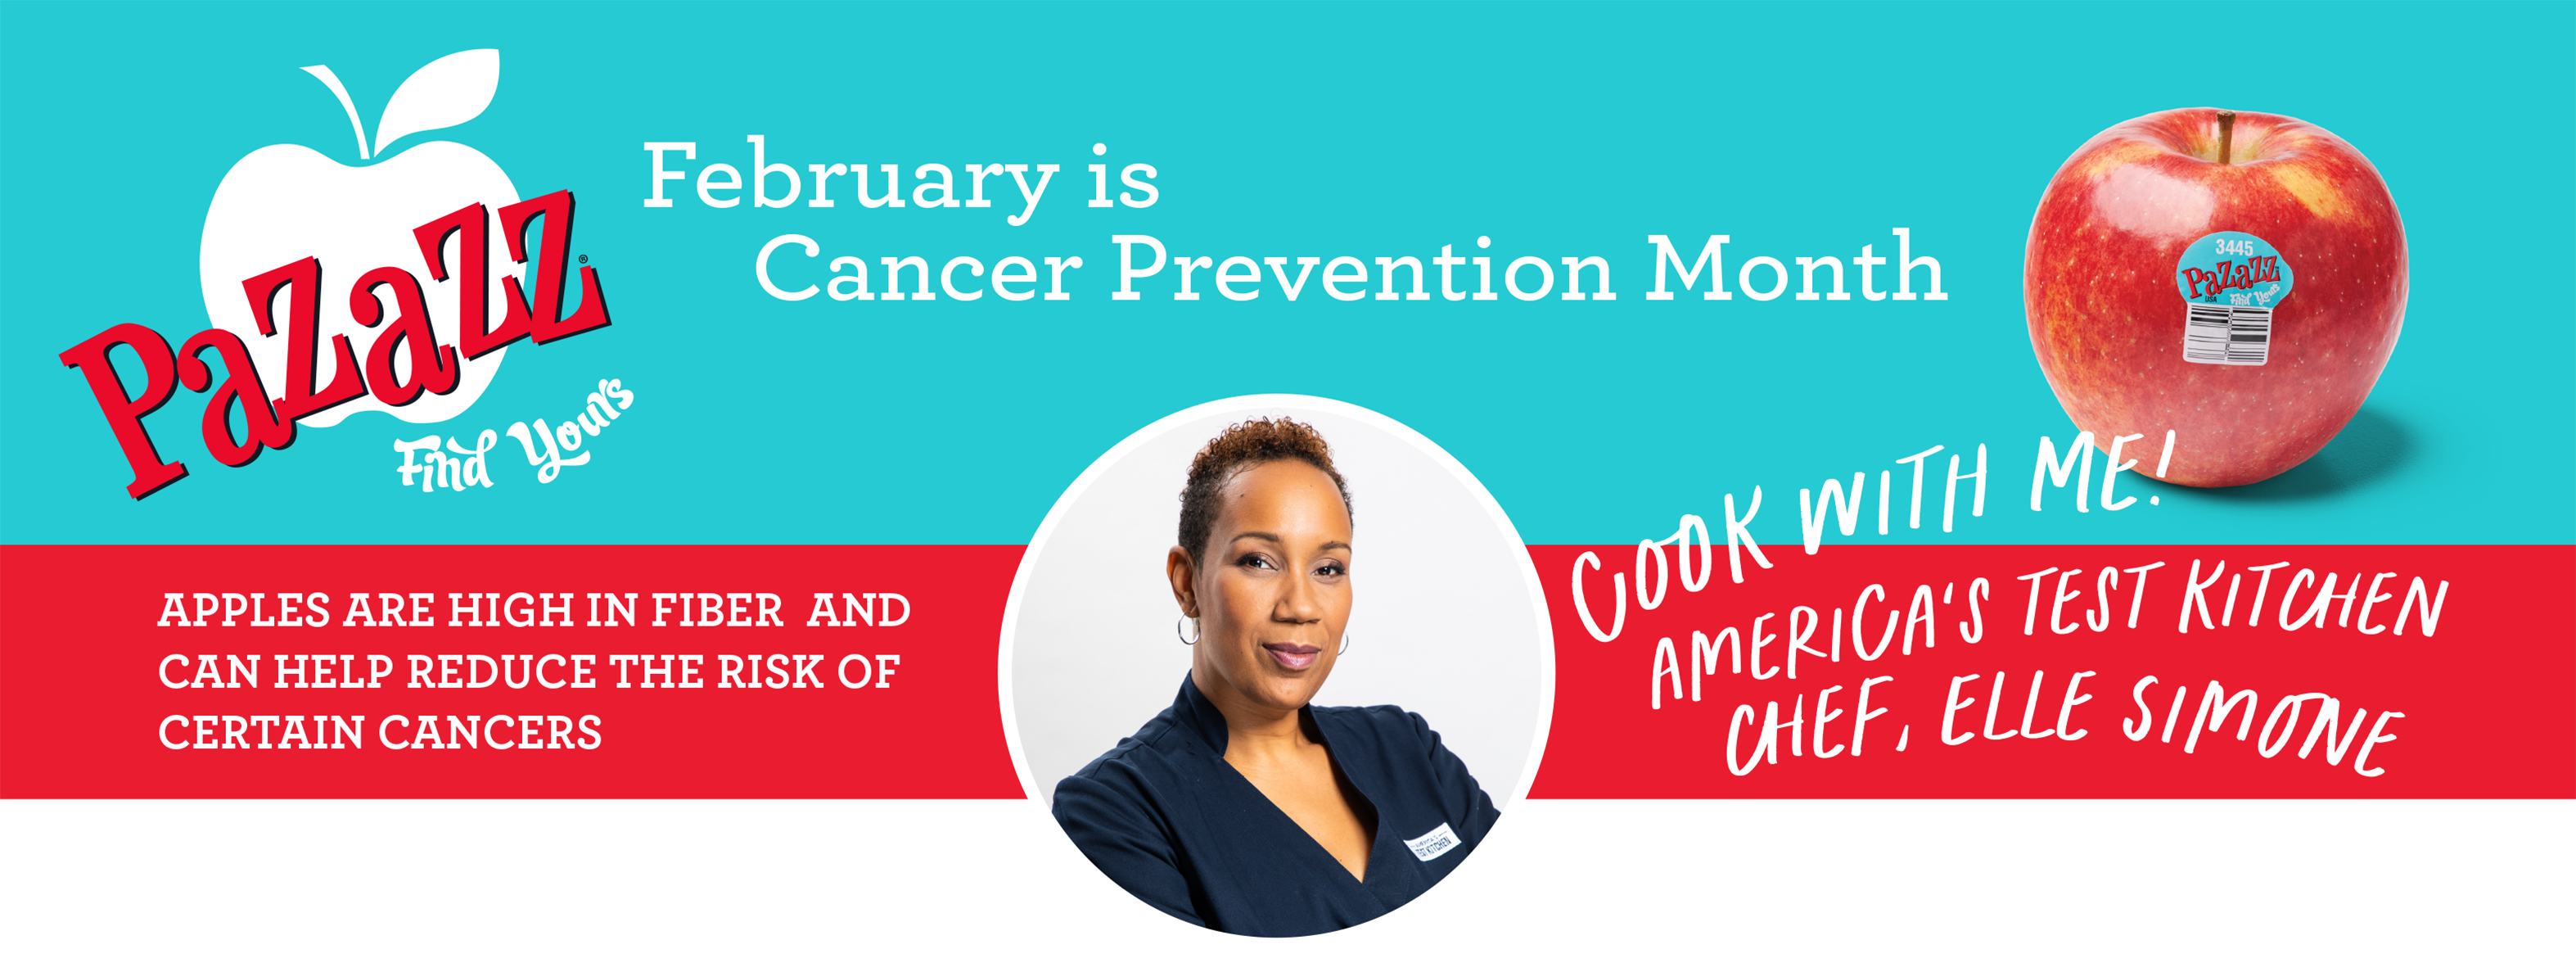 Banner in Blue and red that reads "February is cancer Prevention Month" above an image of celebrity chef Elle Simone.